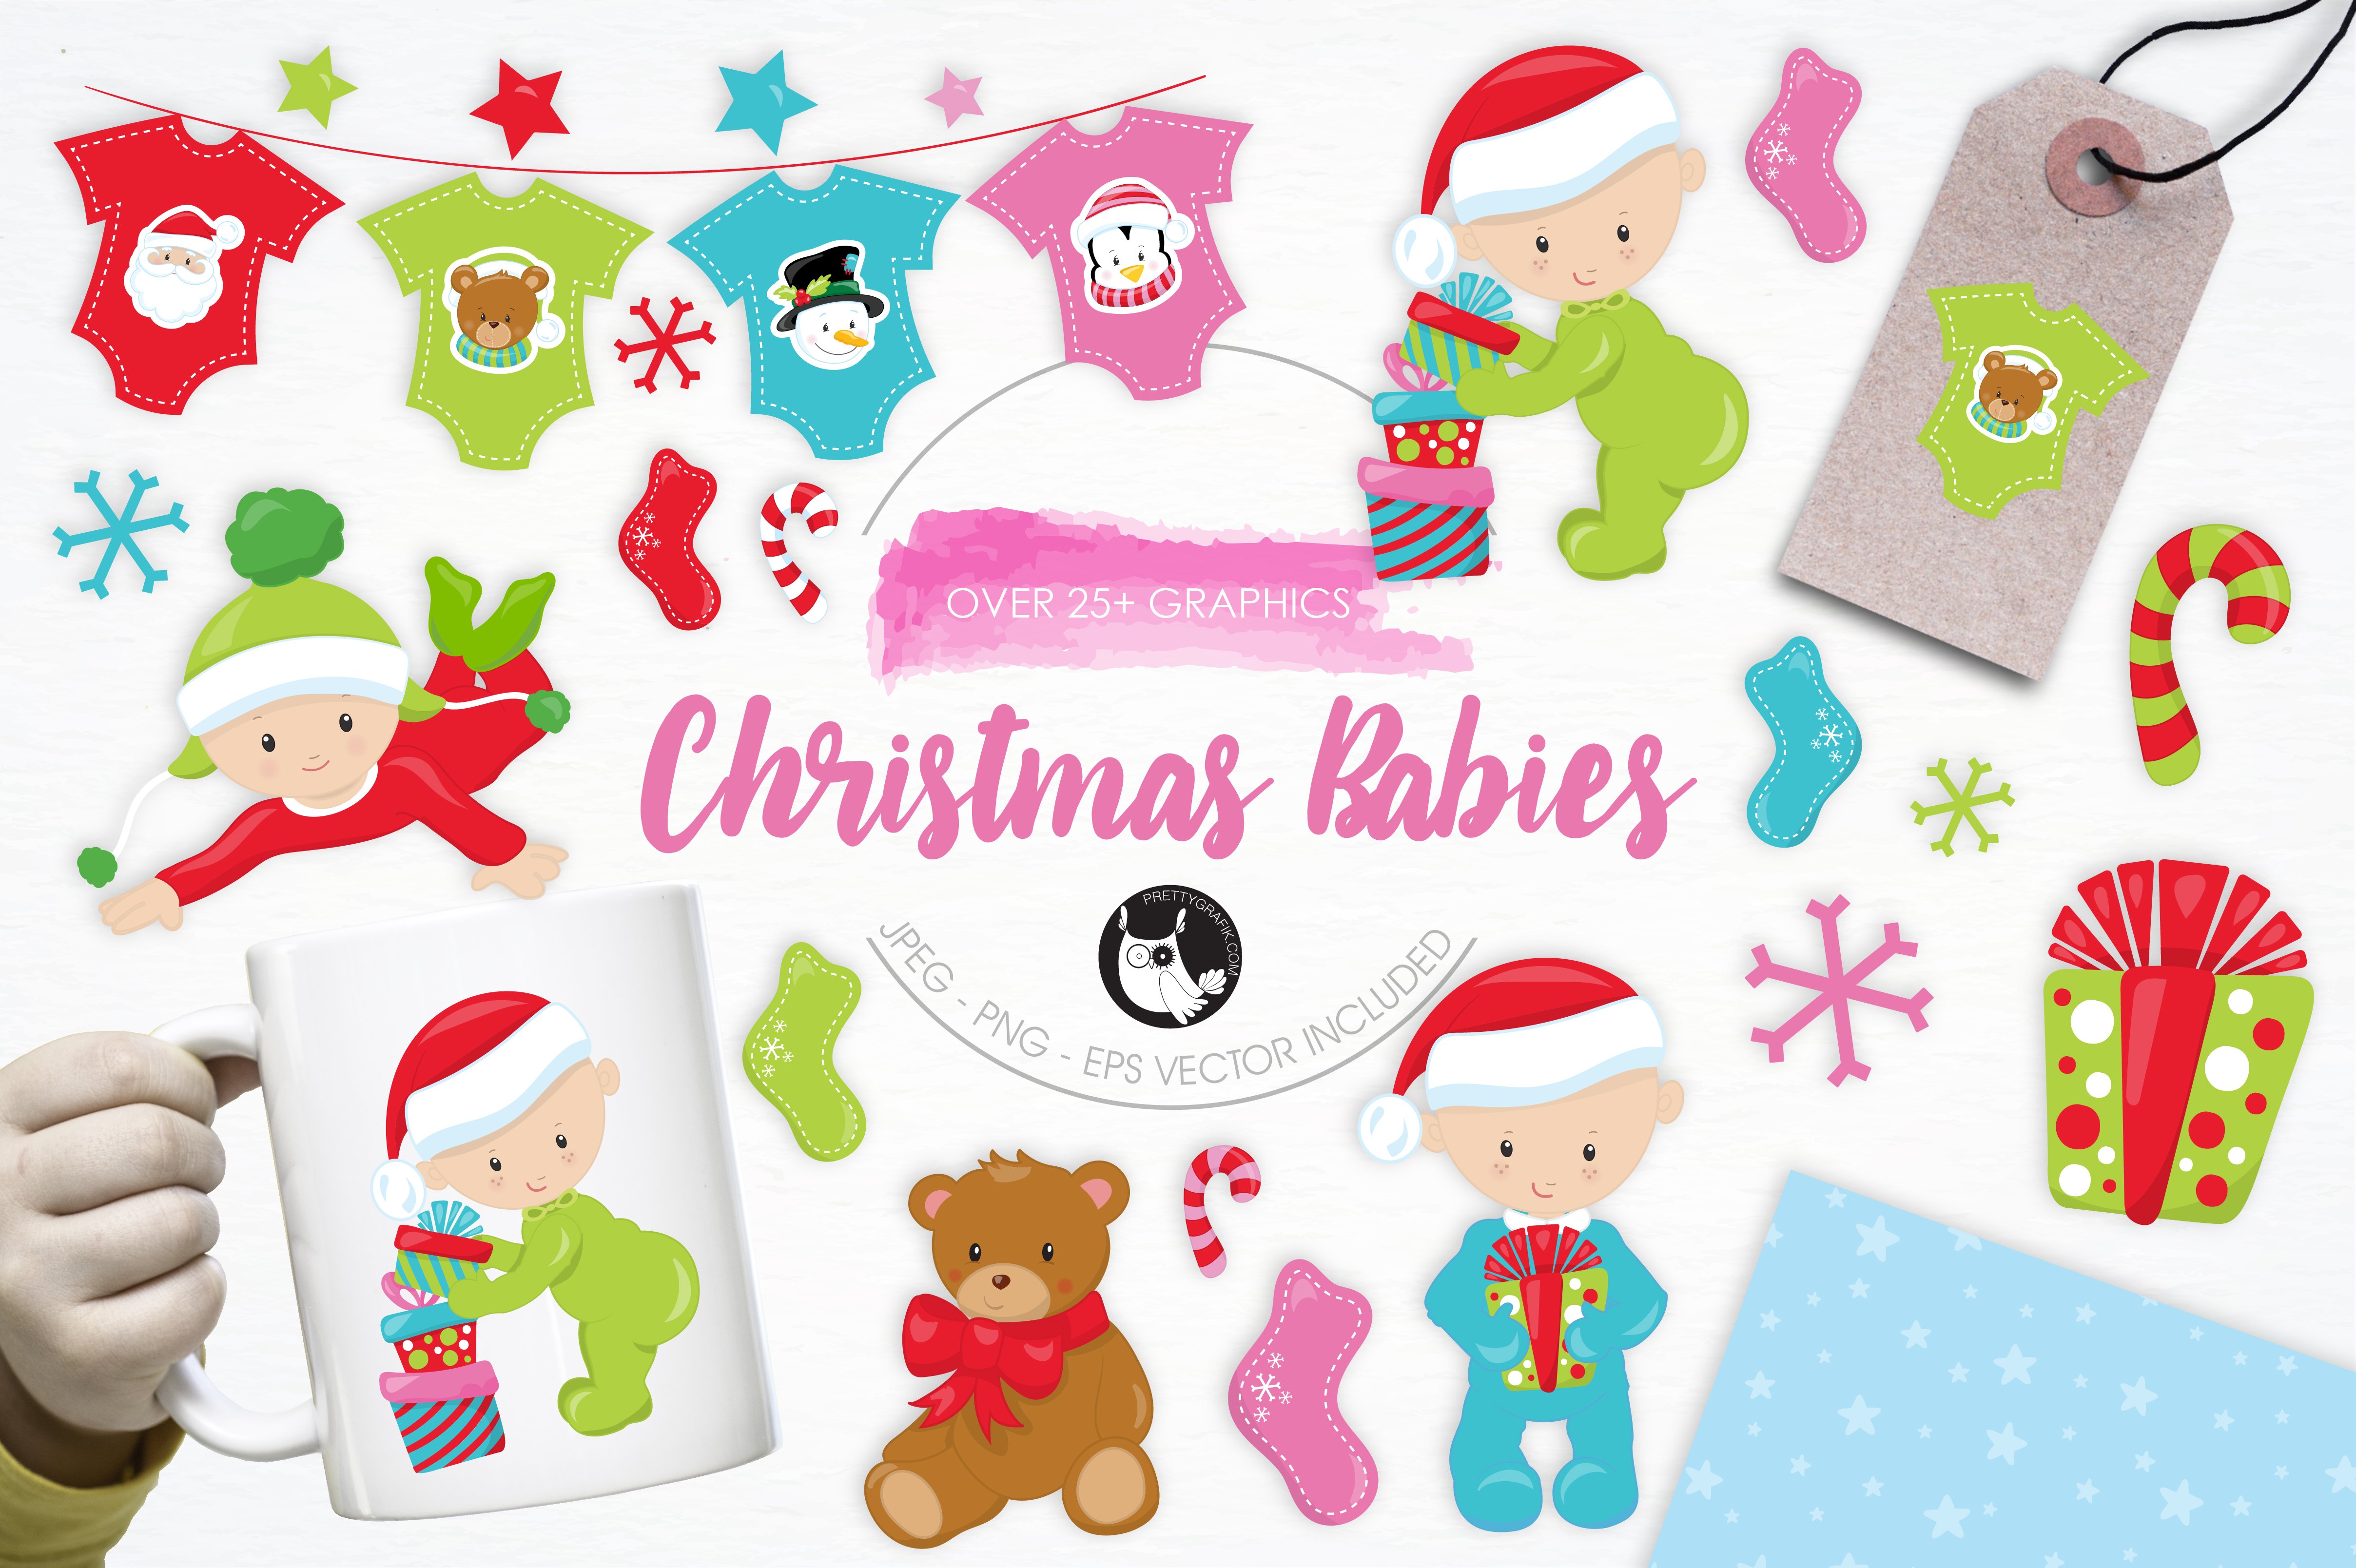 Christmas Babies illustration pack - Vector Image